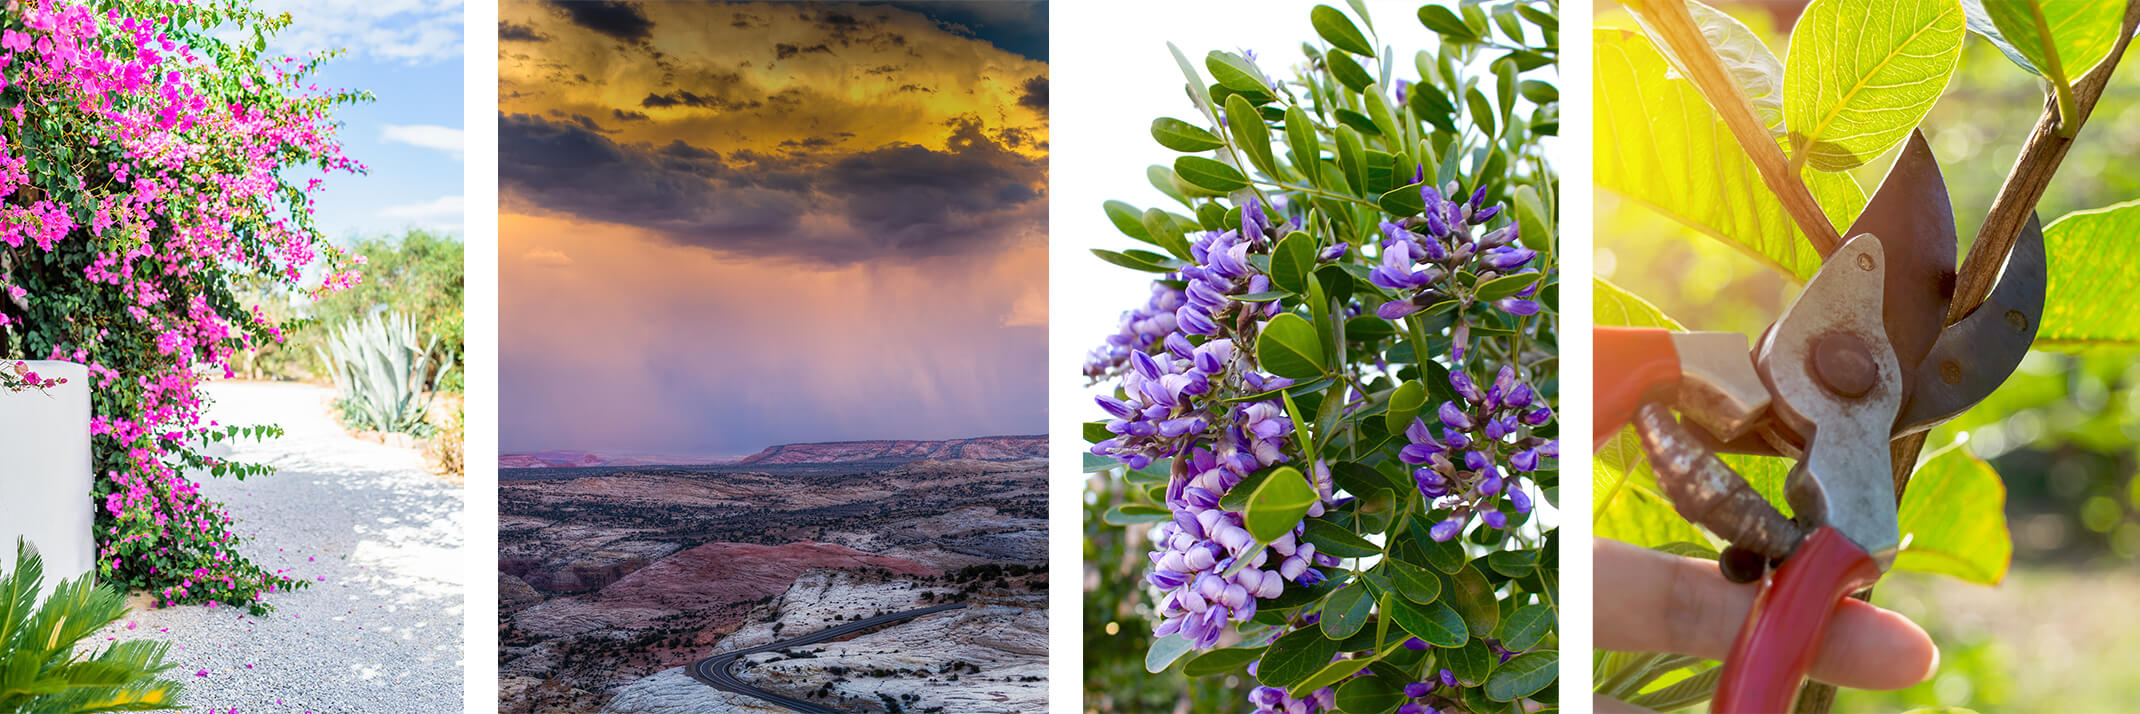 Pink Bougainvillea, a storm in the desert, a Texas Mountain Laurel, and a plant being pruned.